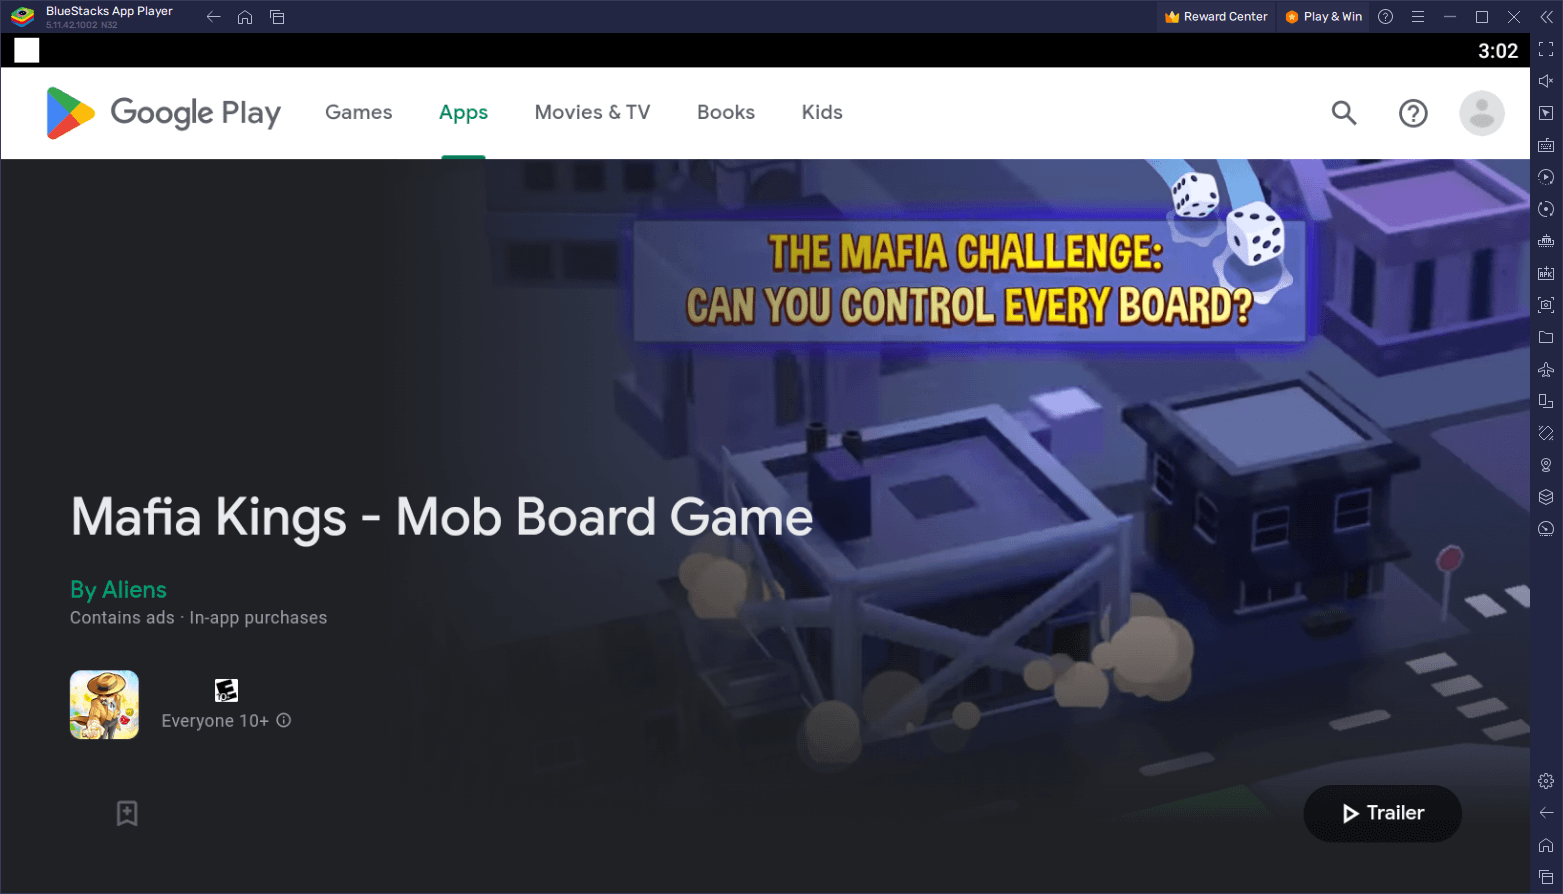 How to Play Mafia Kings - Mob Board Game on PC With BlueStacks